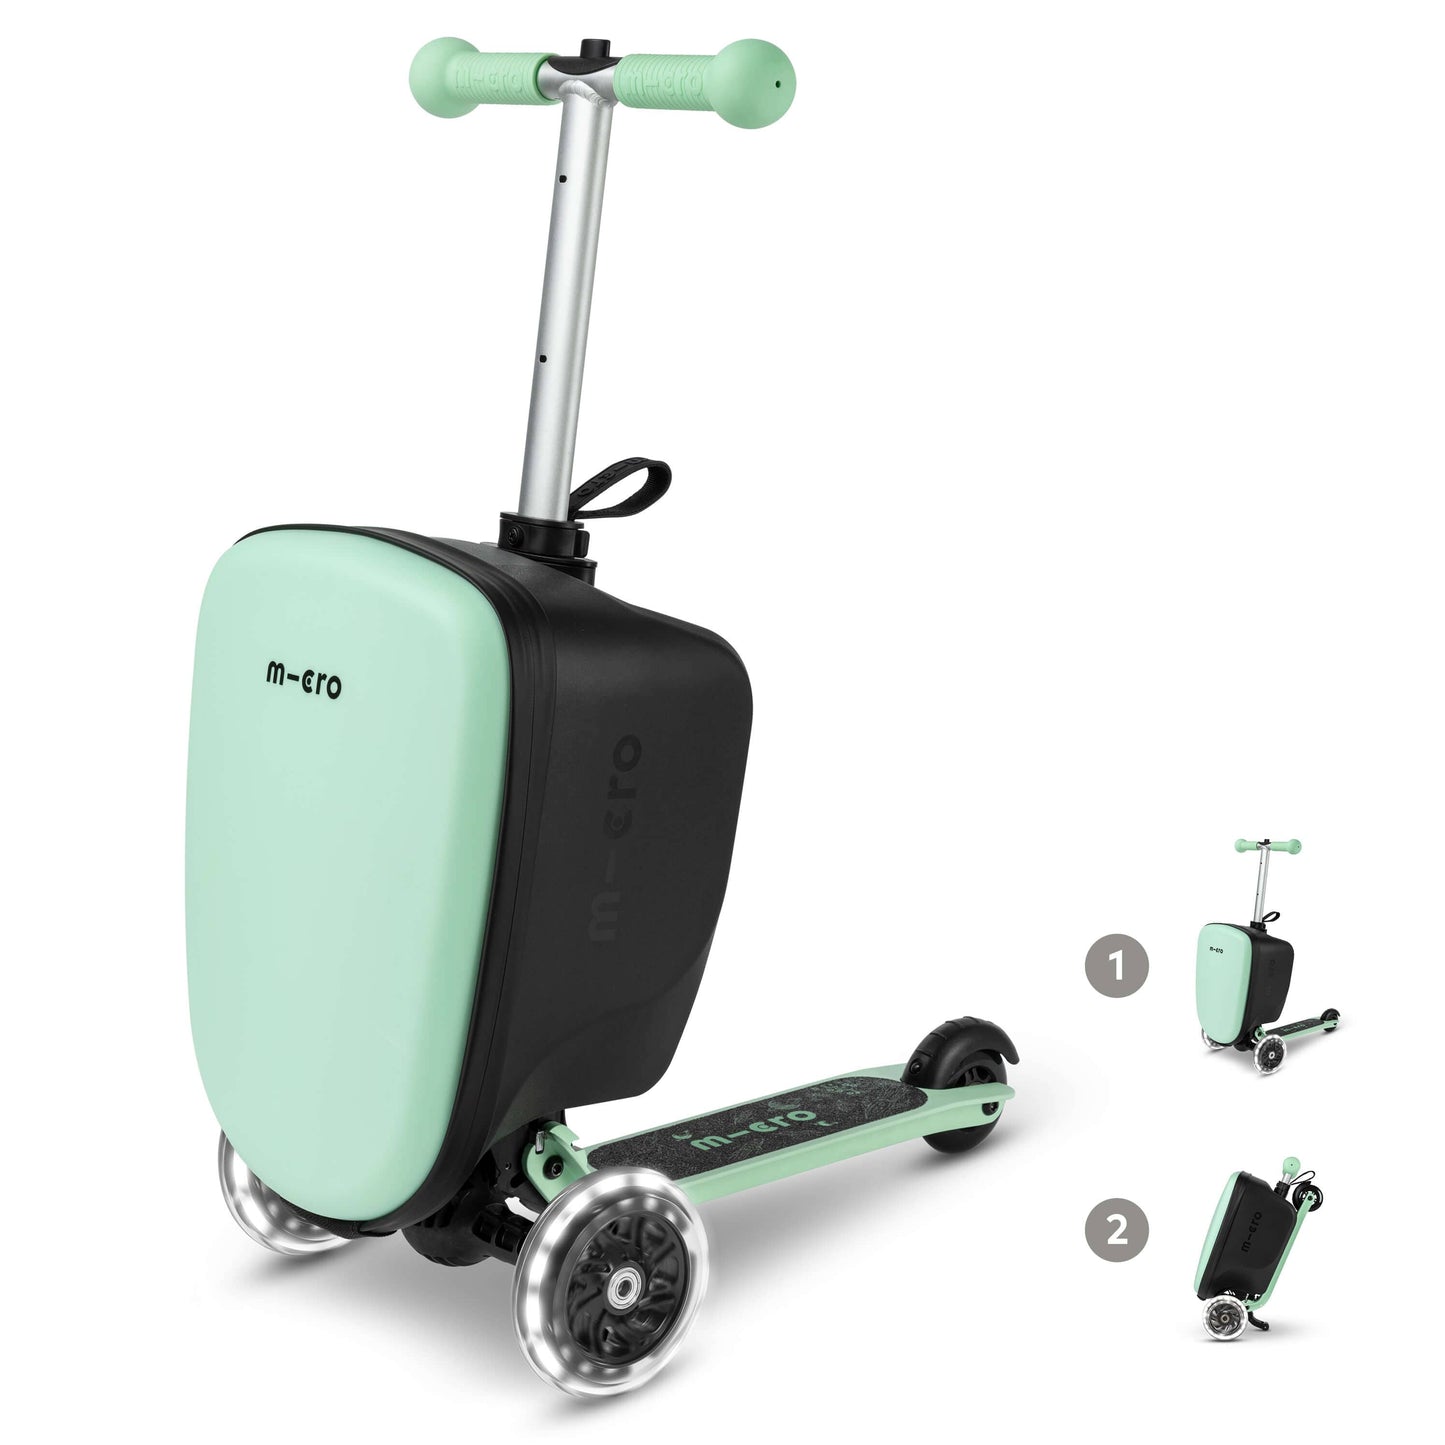 Micro Scooter Mini Mint Luggage Scooter front left